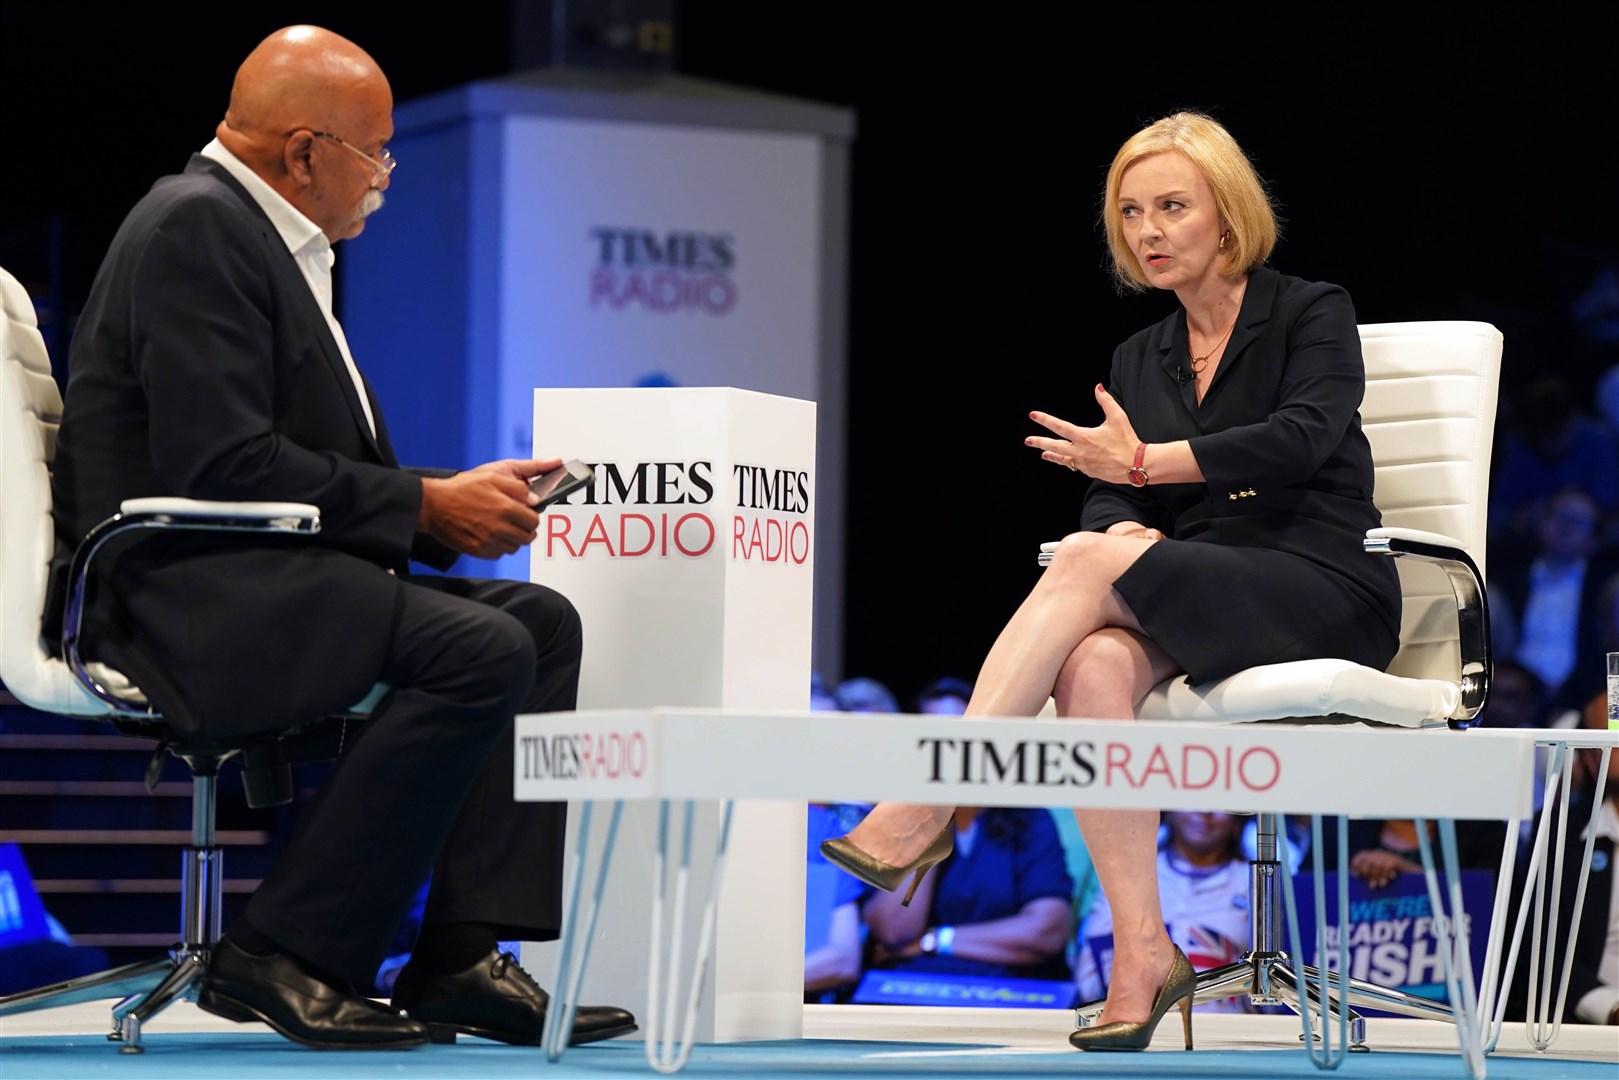 Times Radio presenter John Pienaar speaking to Liz Truss during a hustings event at the NEC in Birmingham as part of their campaign to be leader of the Conservative Party and the next prime minister (Jacob King/PA)